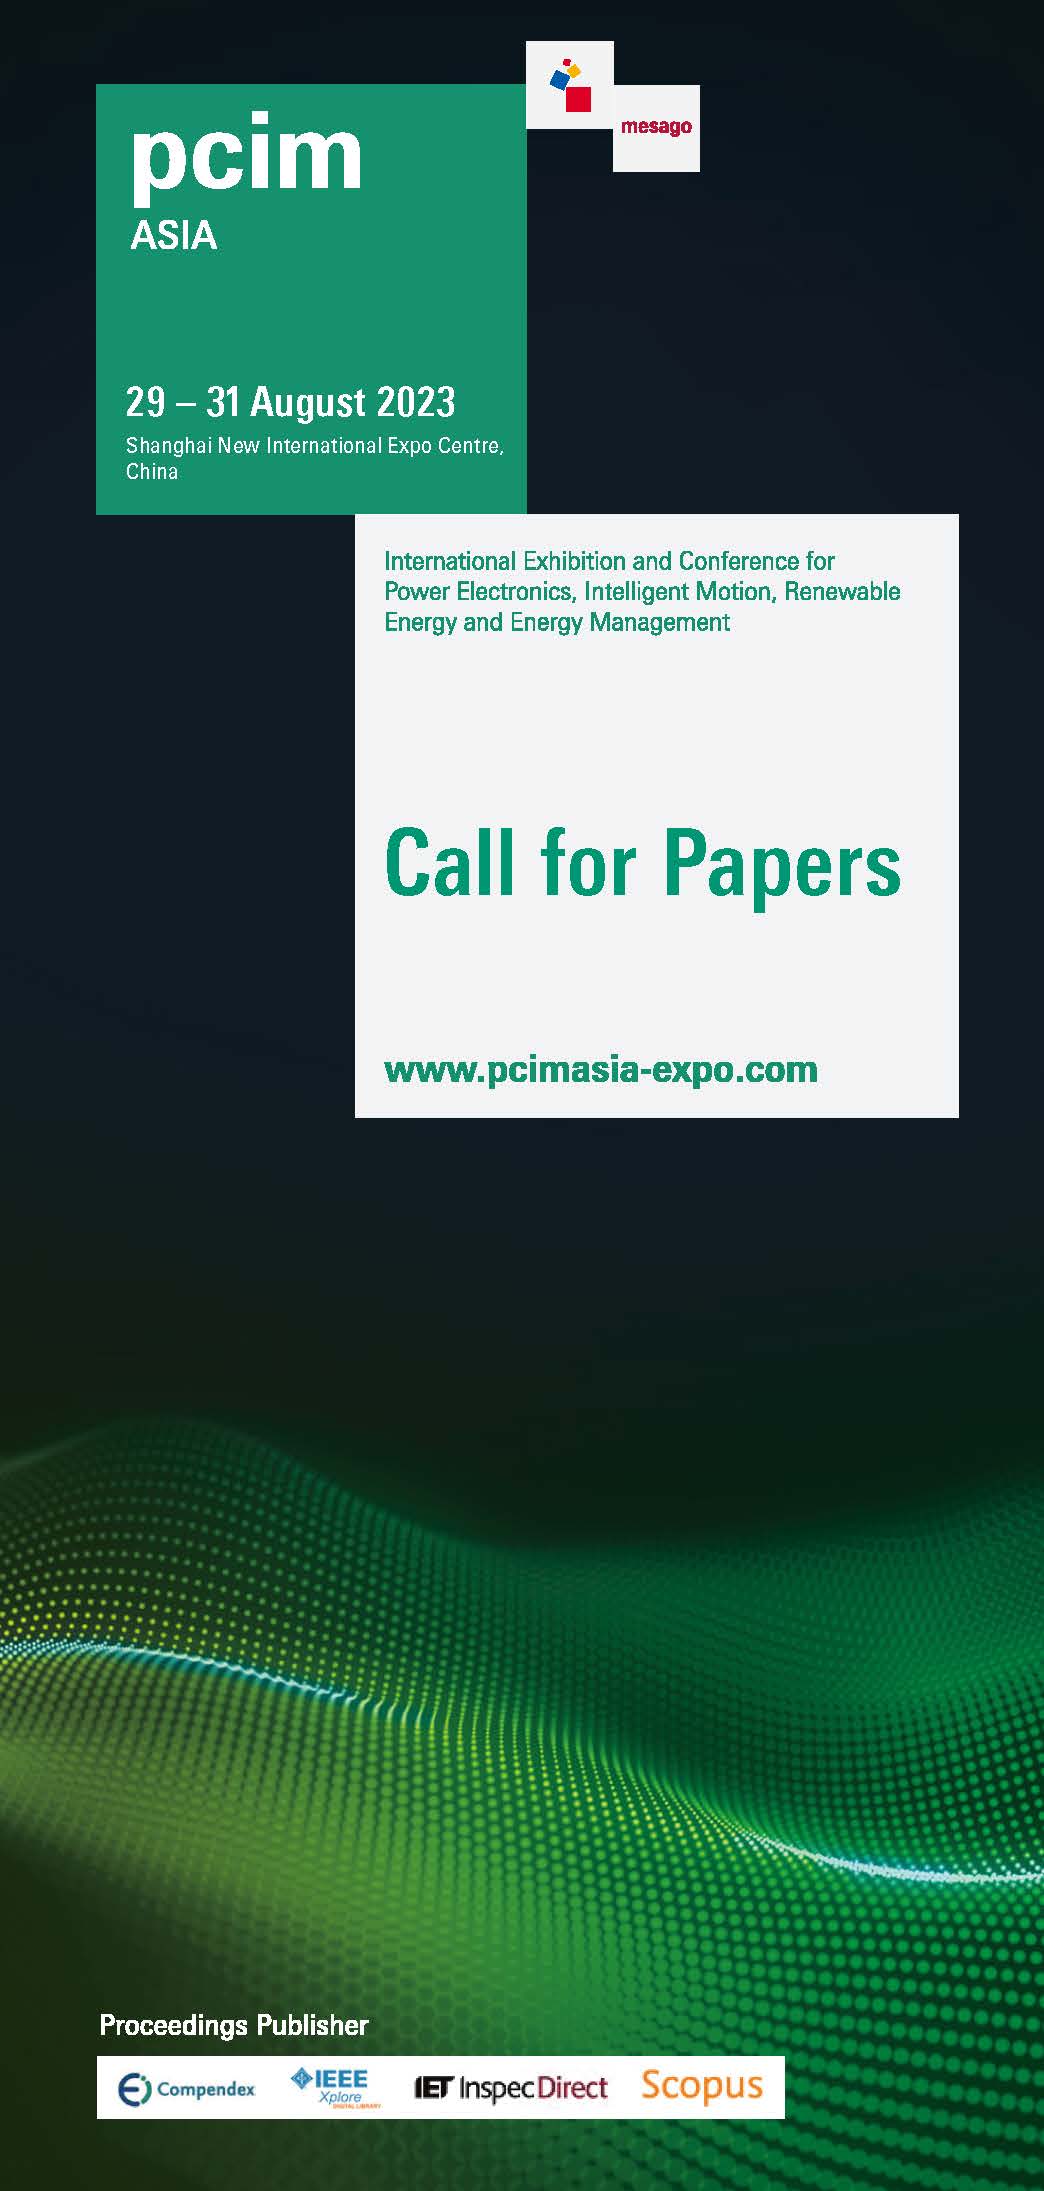 PCIM Asia 2023 Call for Paper Flyer 1